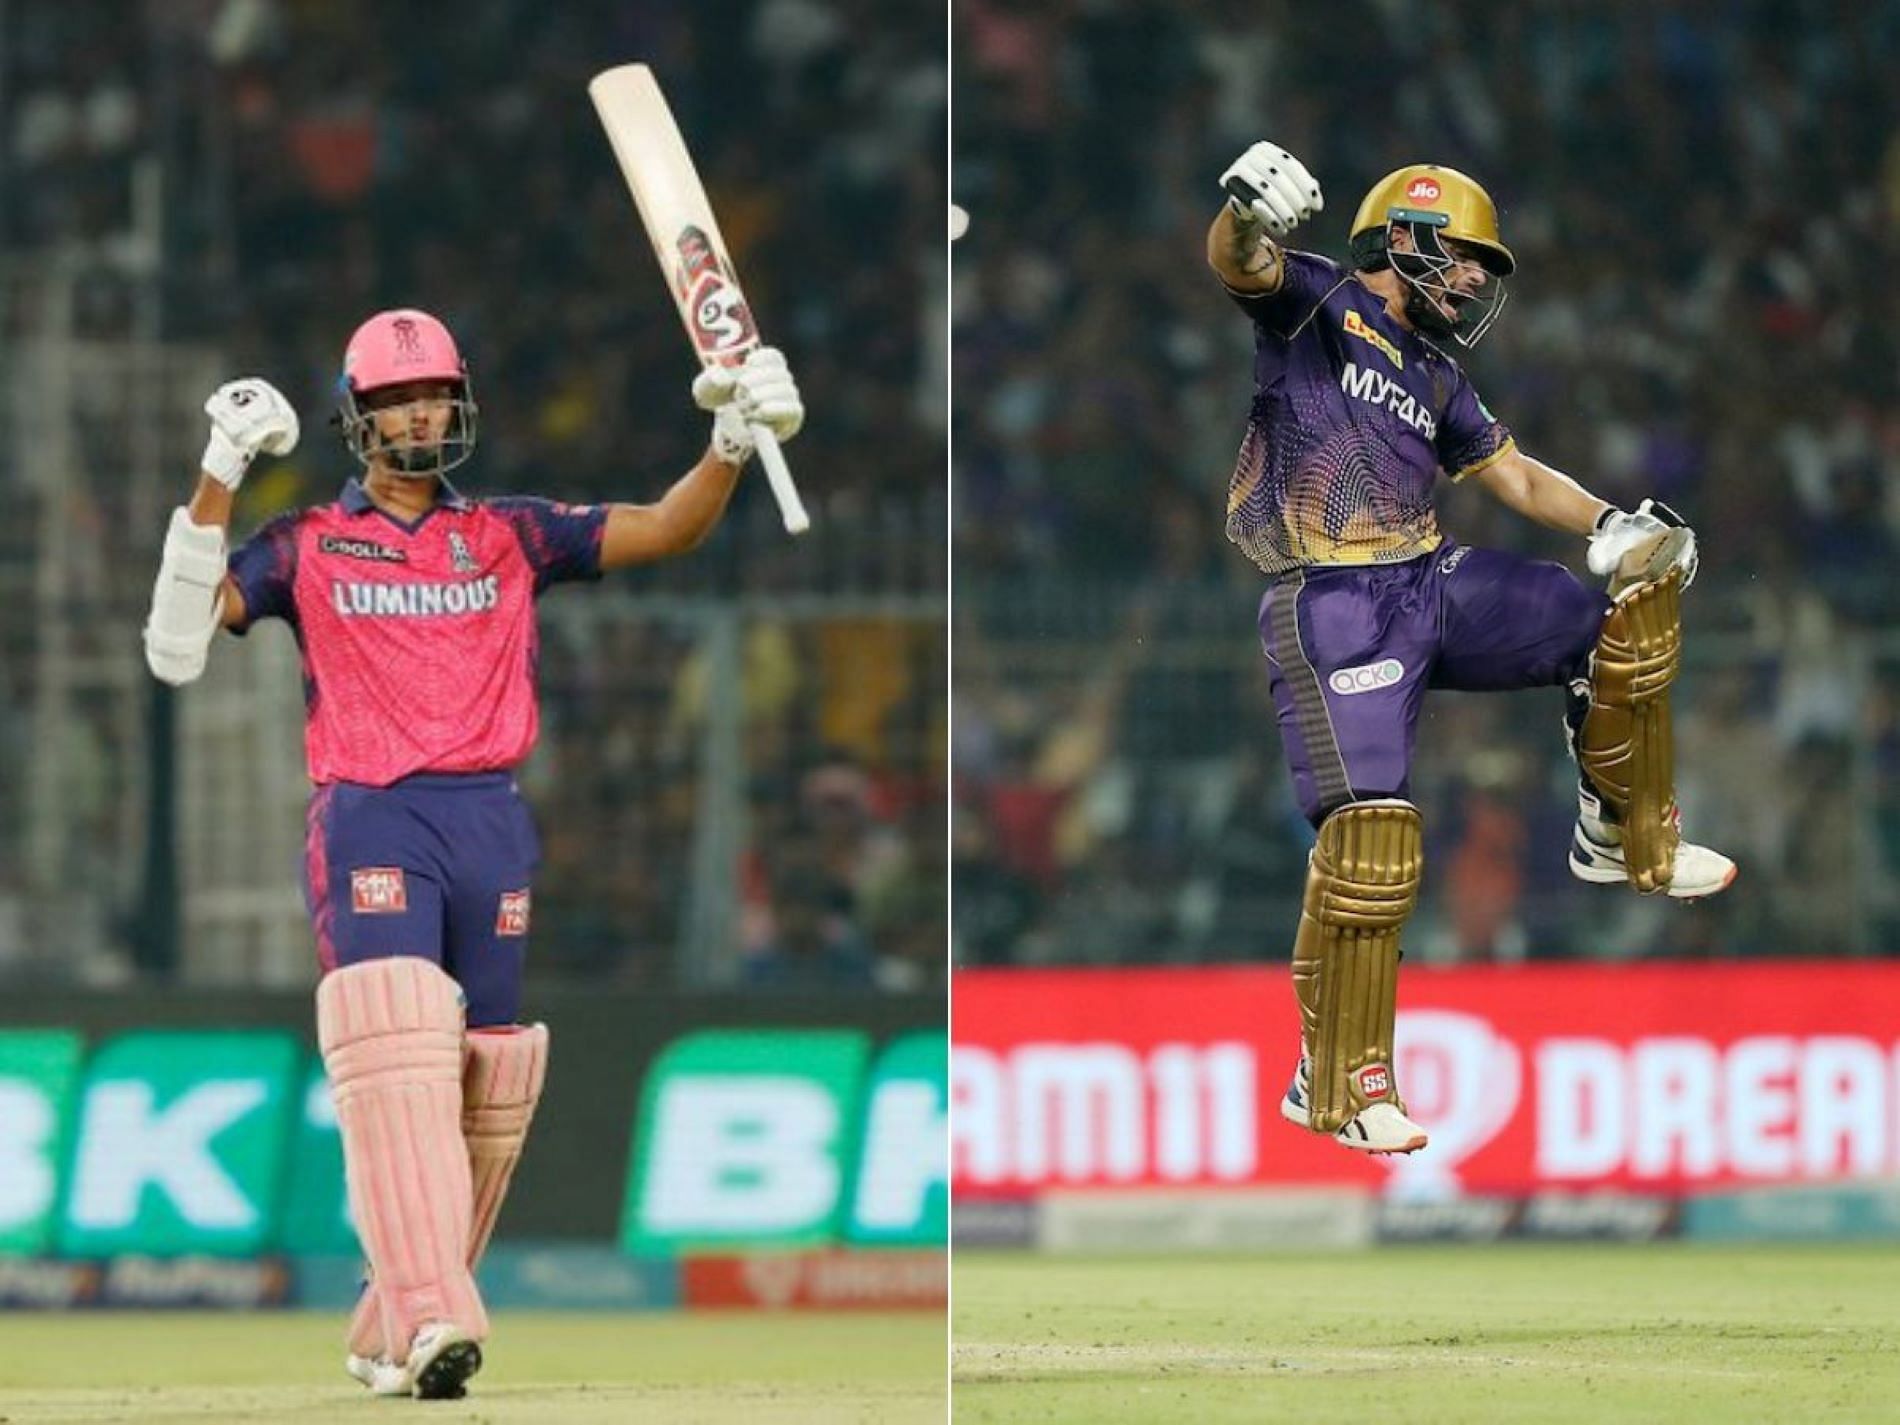 Jaiswal and Rinku have set the IPL blazing with their batting